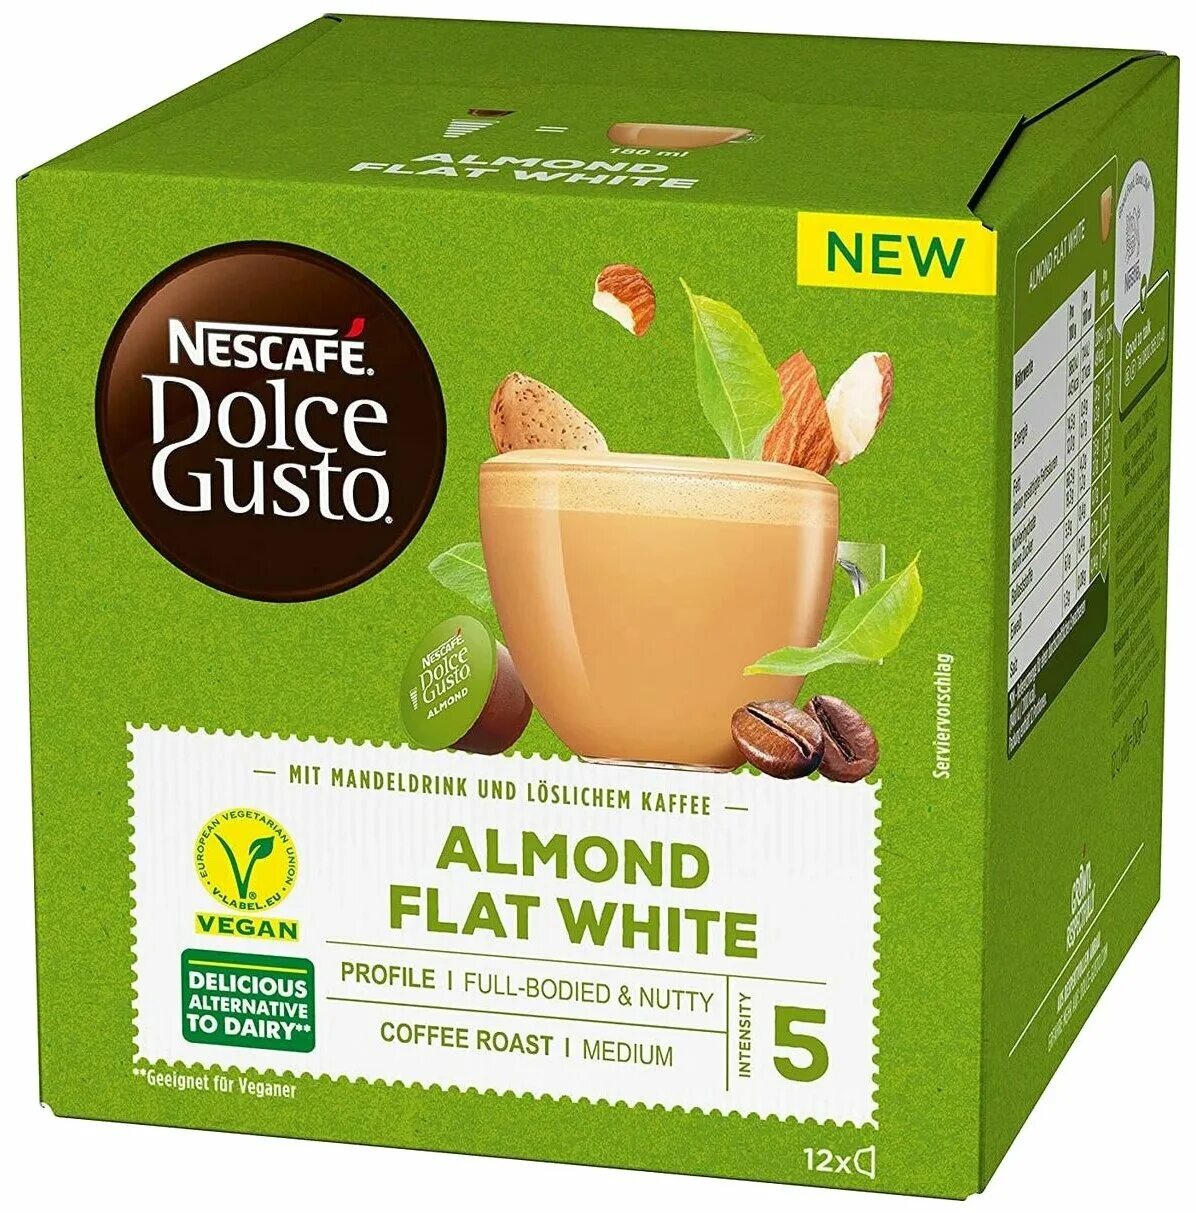 Dolce white. Дольче густо Almond. Капсулы Dolce gusto Flat White. Капсулы Dolce gusto Almond. Nescafe Dolce gusto Almond.